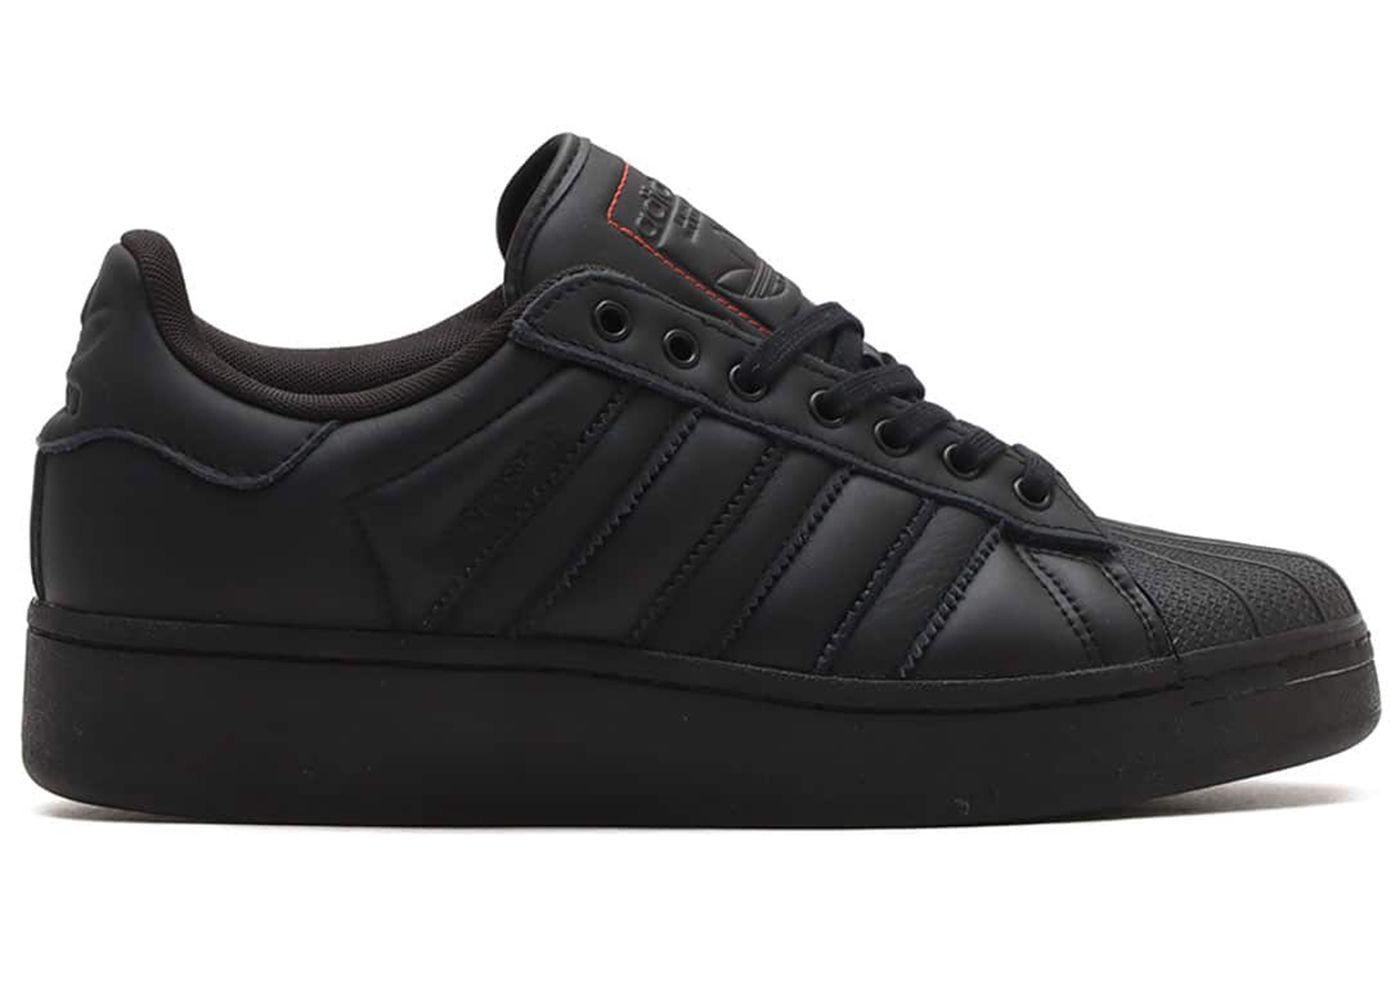 adidas Superstar XLG atmos Black Red